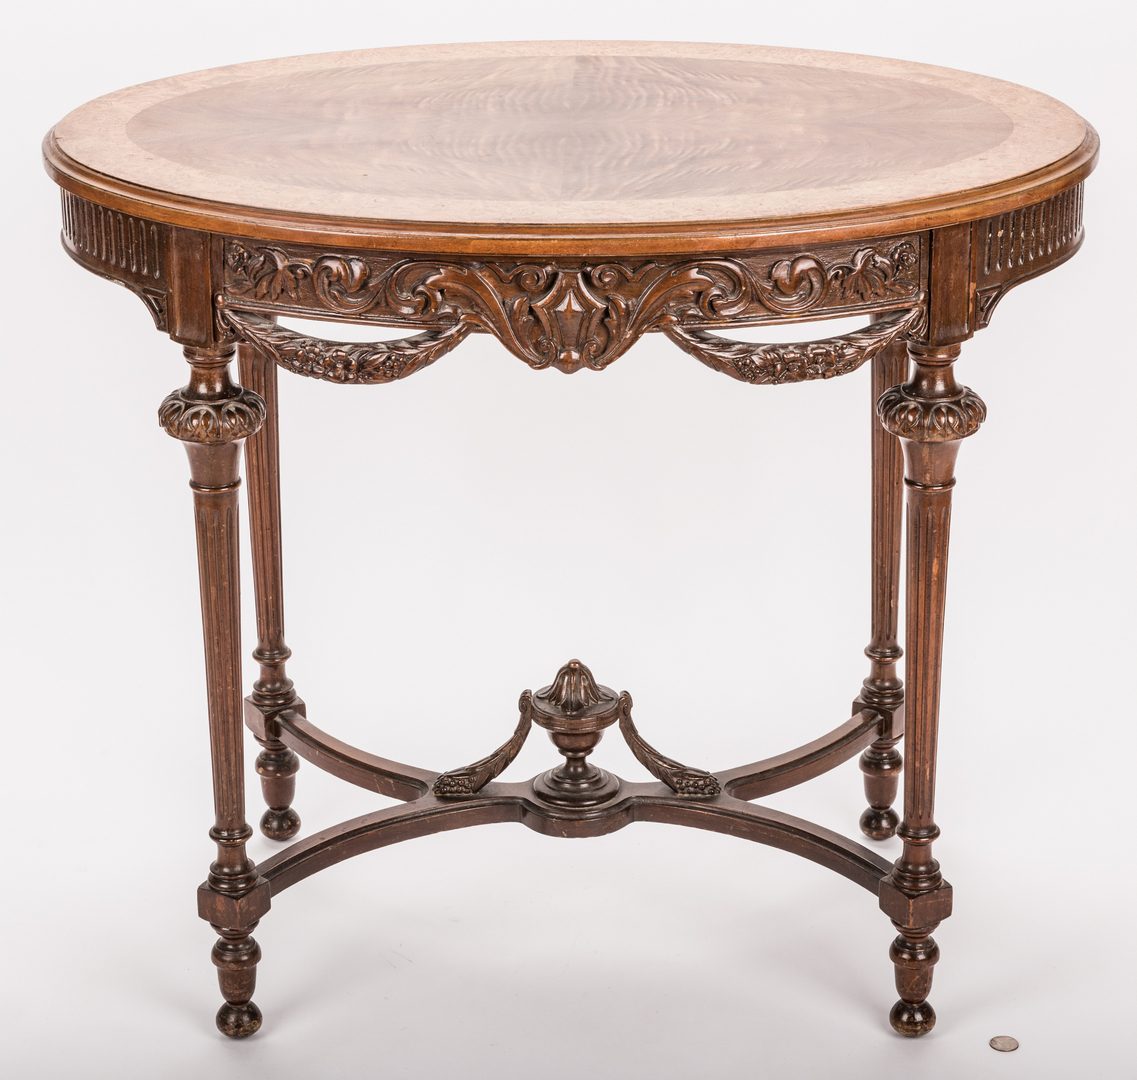 Lot 206: Louis XVI style Inlaid Oval Table